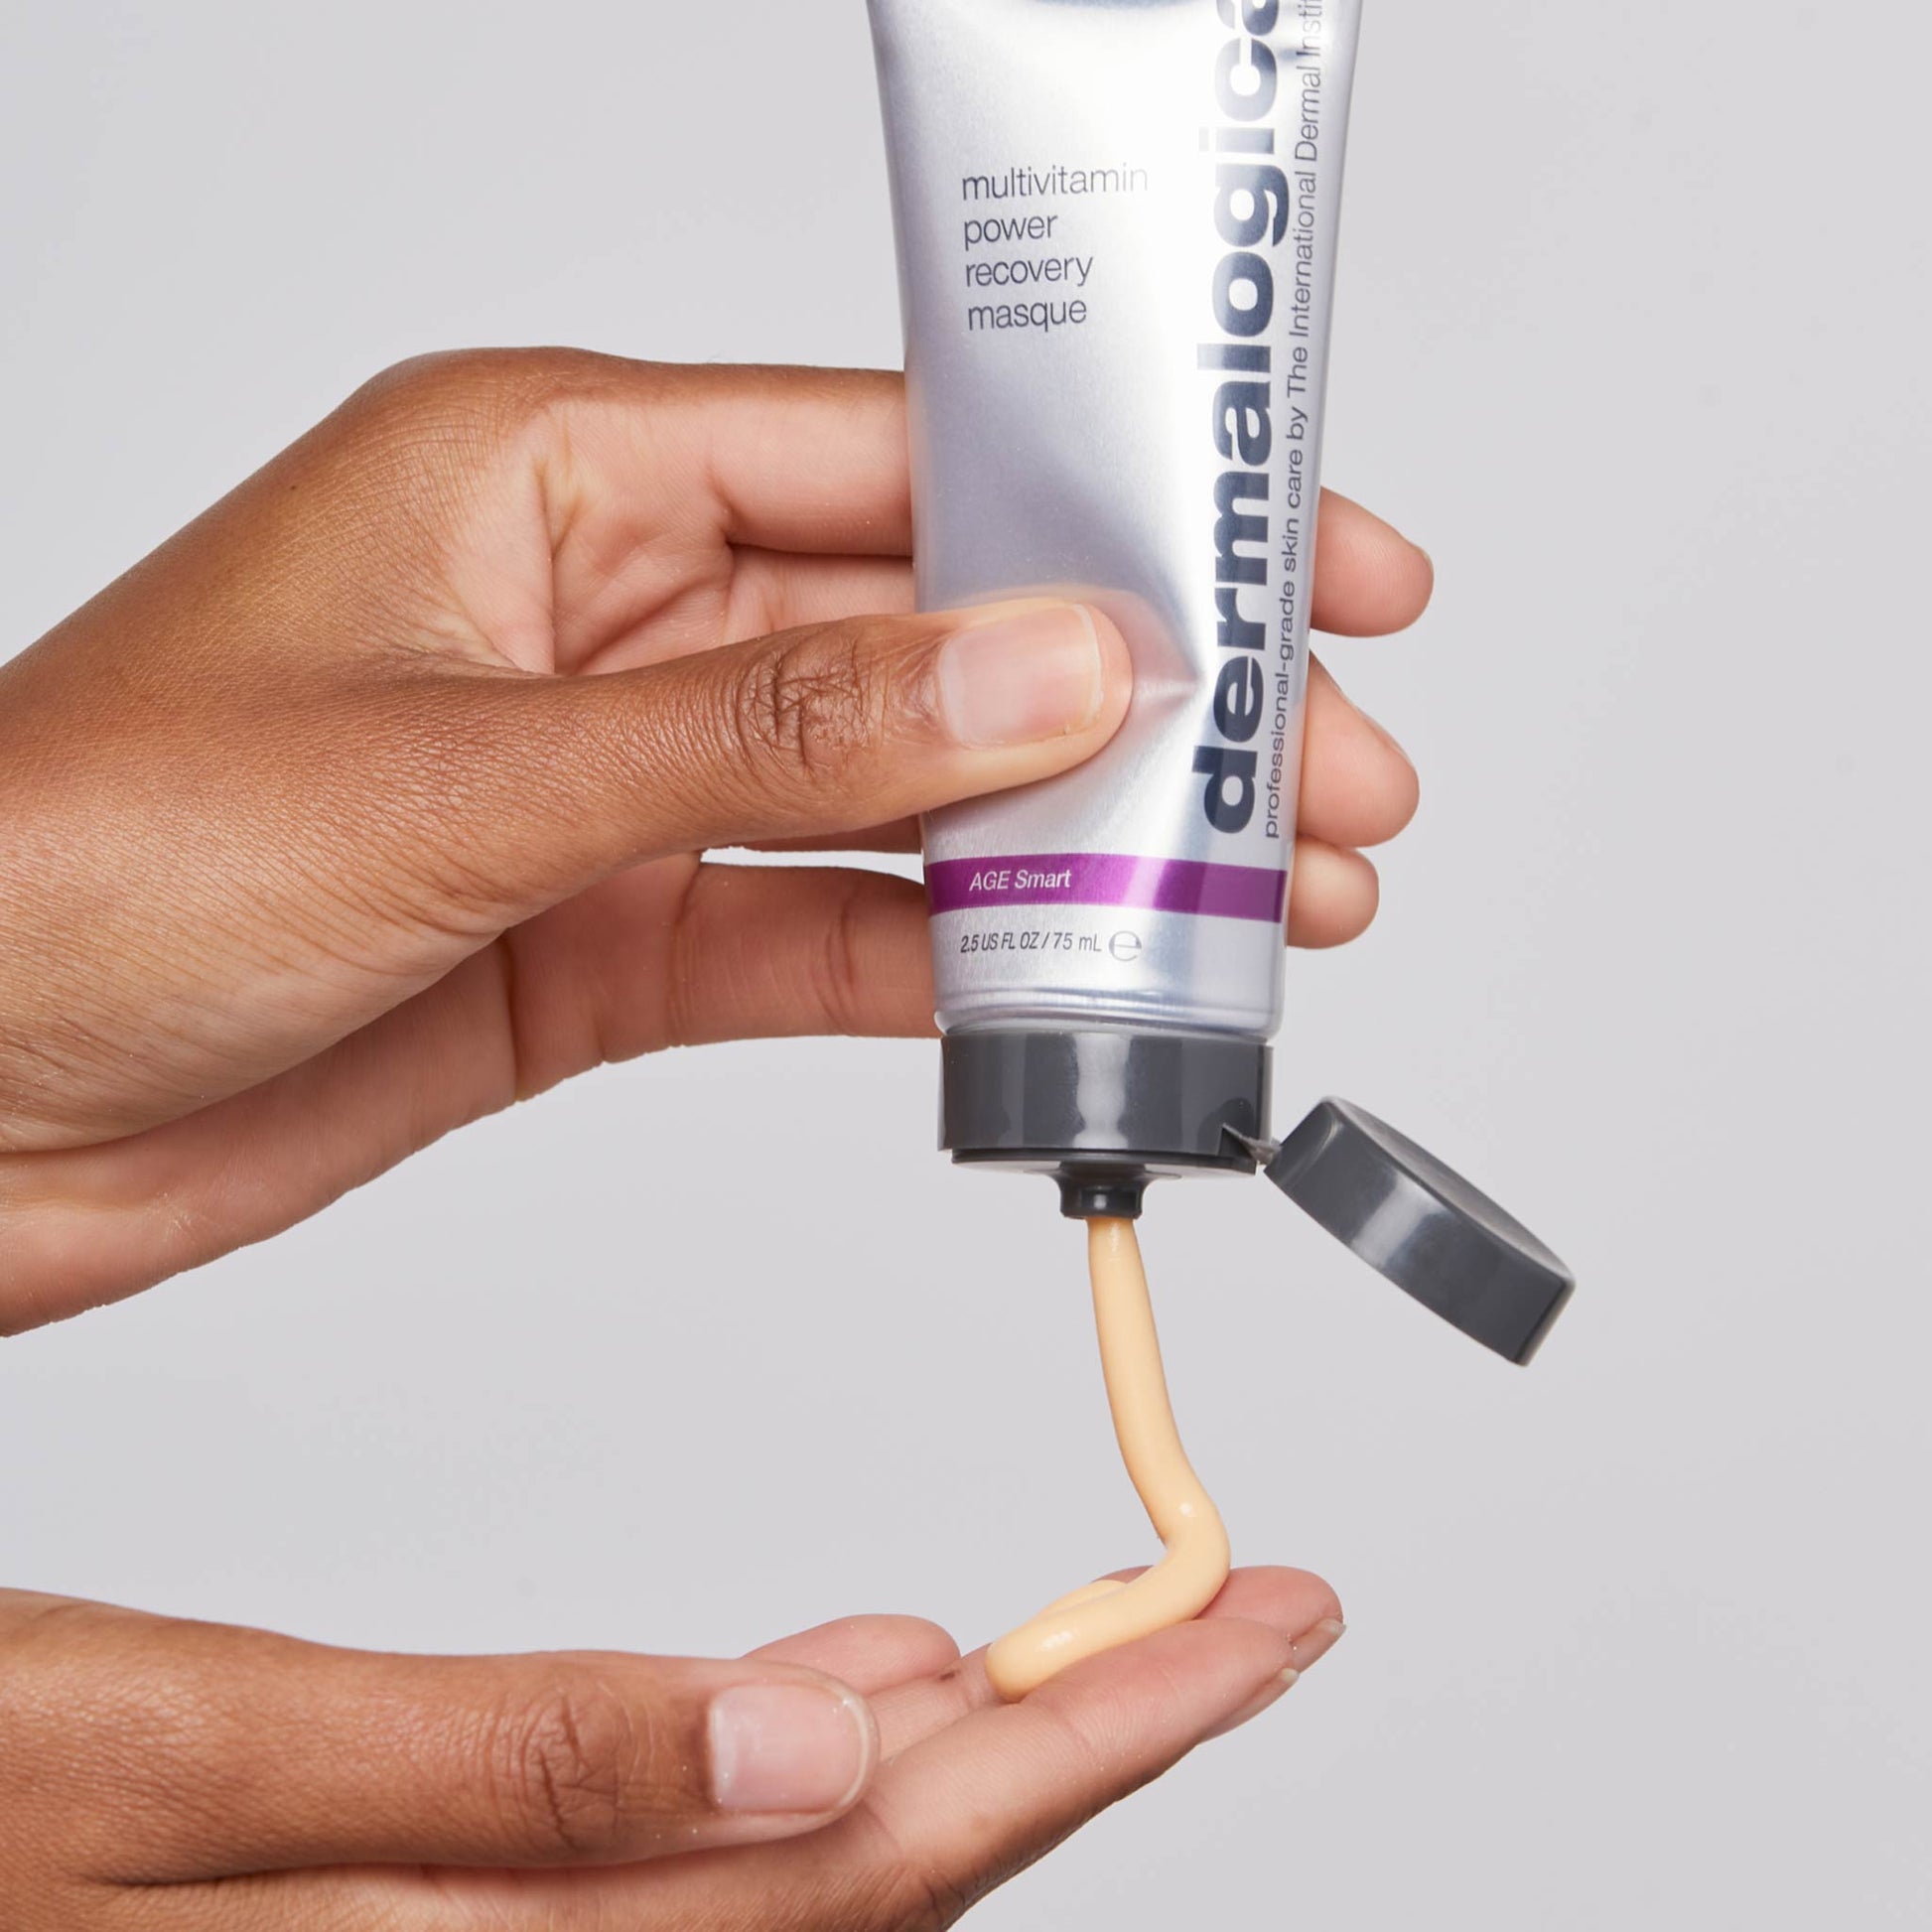 multivitamin power recovery masque being dispensed onto fingertip